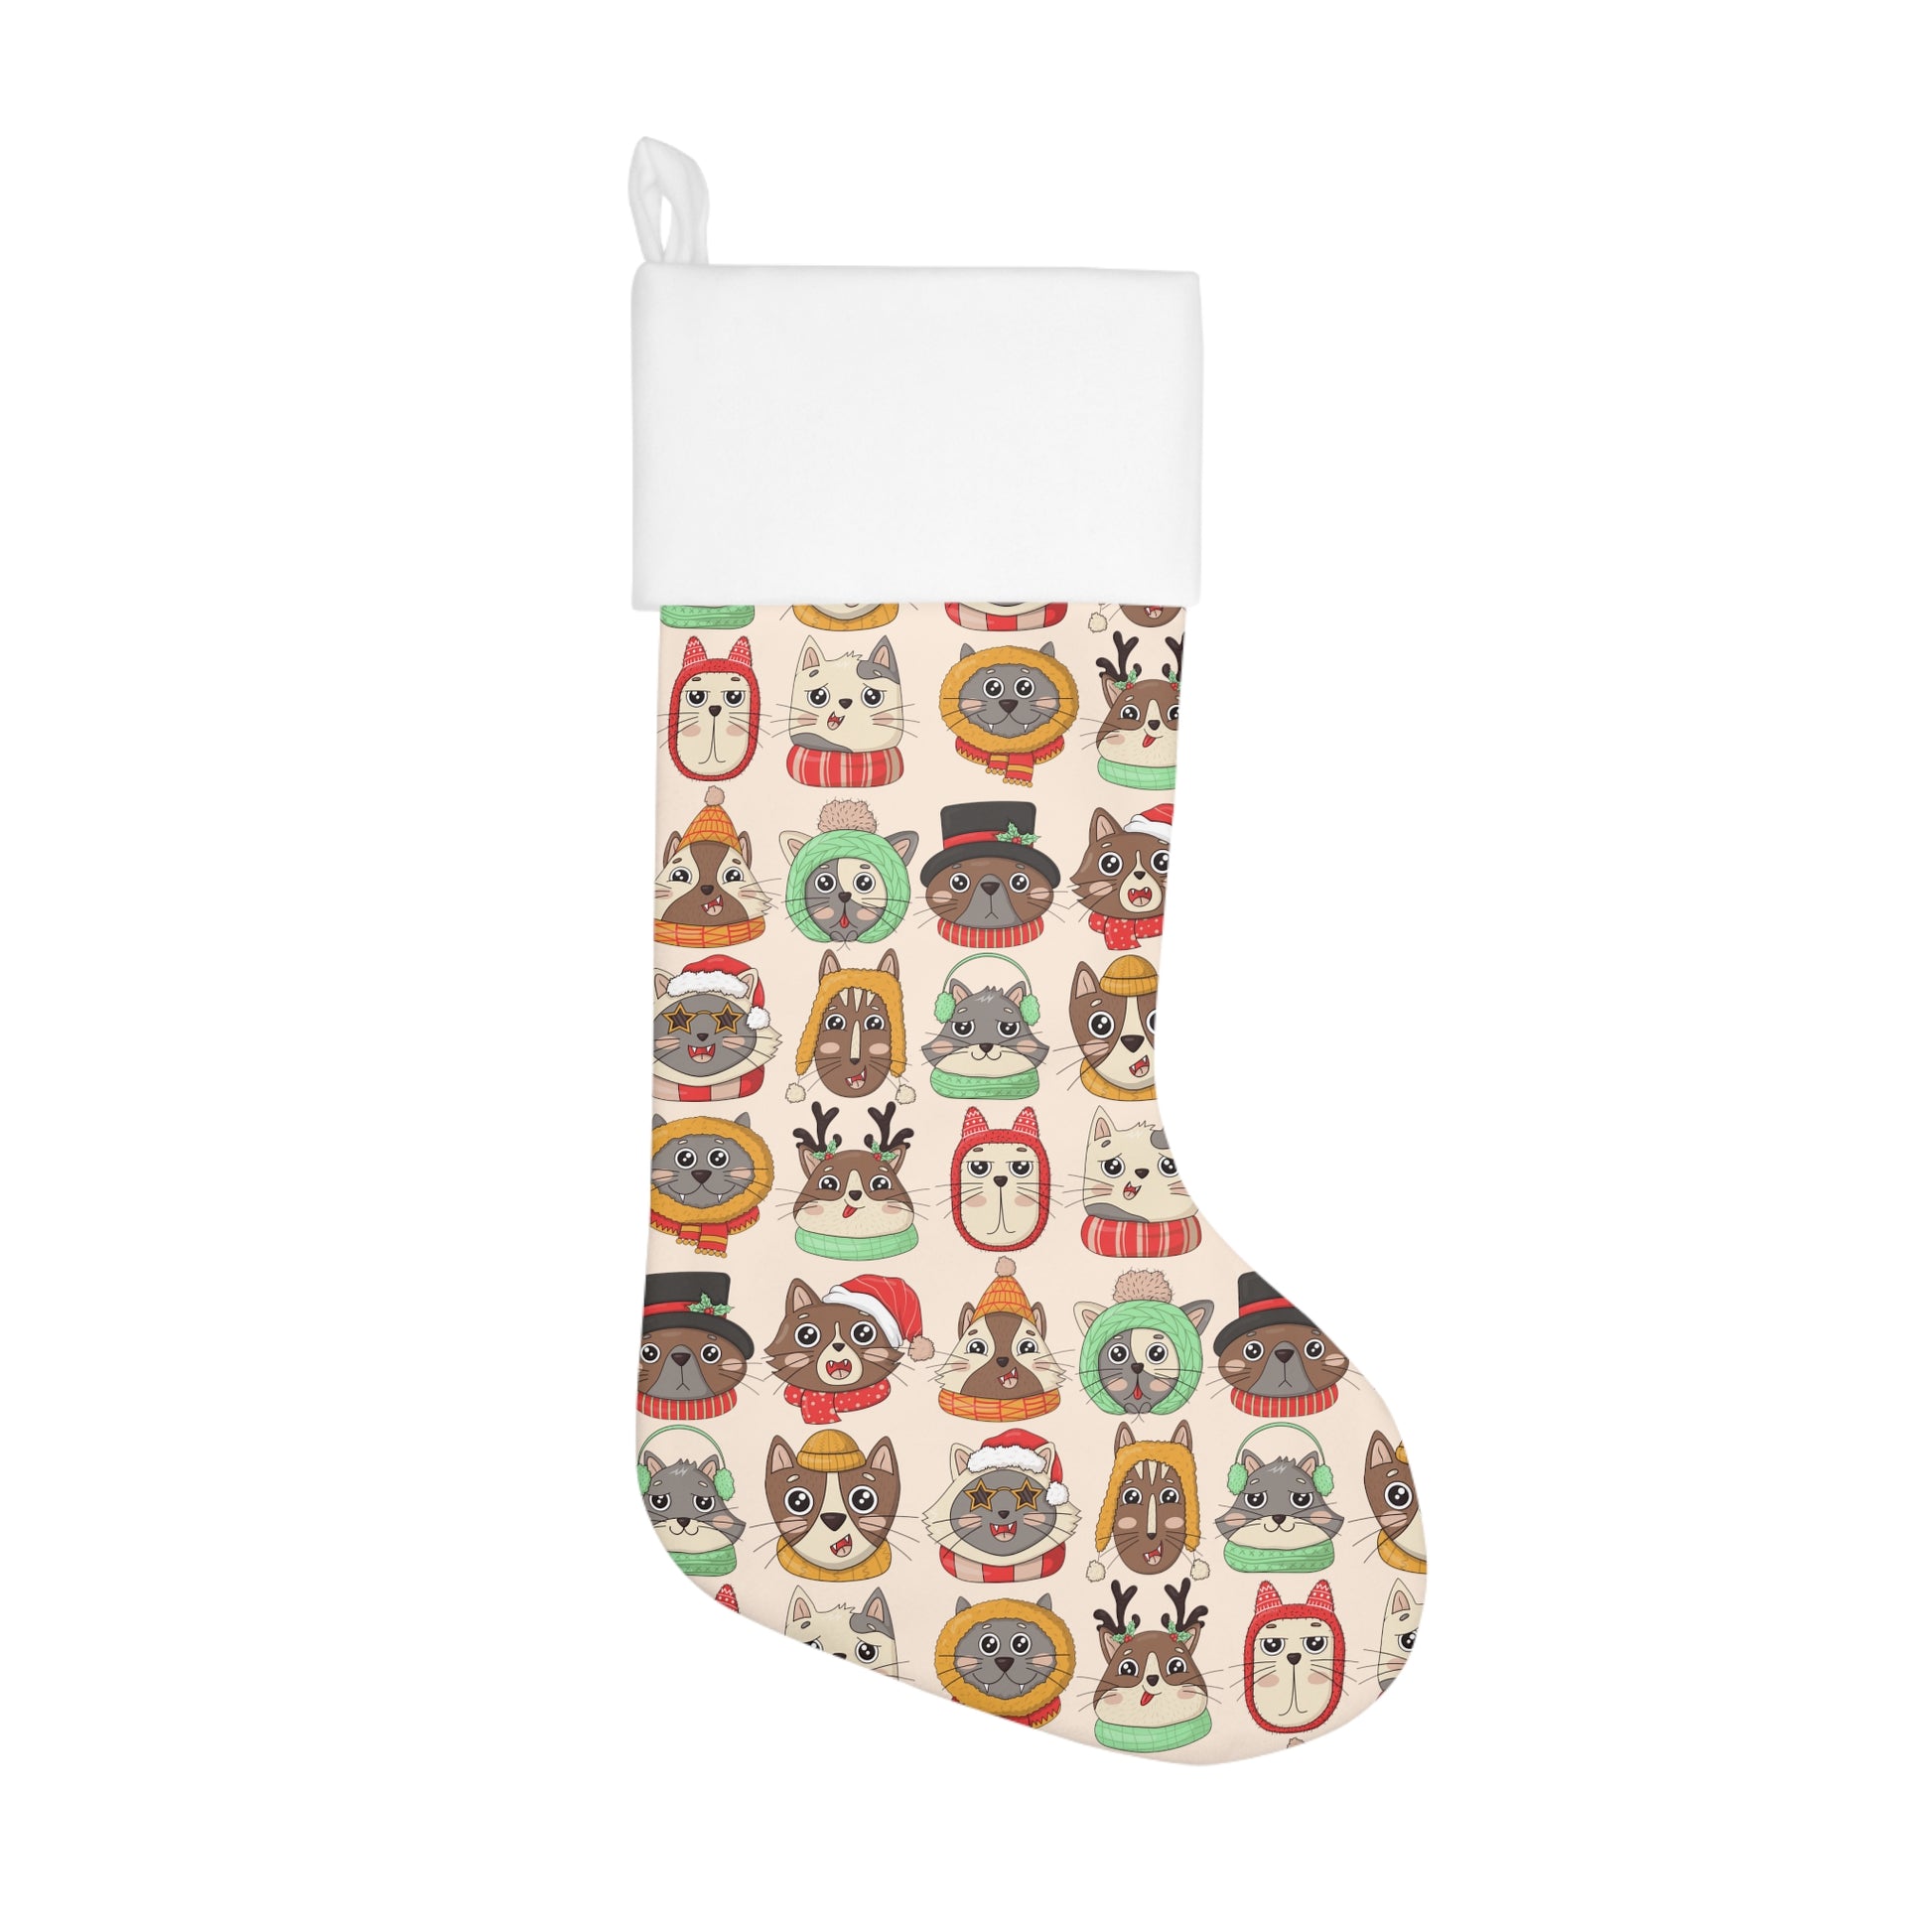 Cats Merry Xmas pattern Santa Stocking, Cute cats with red Santa's hat Christmas Holiday Stocking, Funny Cats Merry Christmas decoration